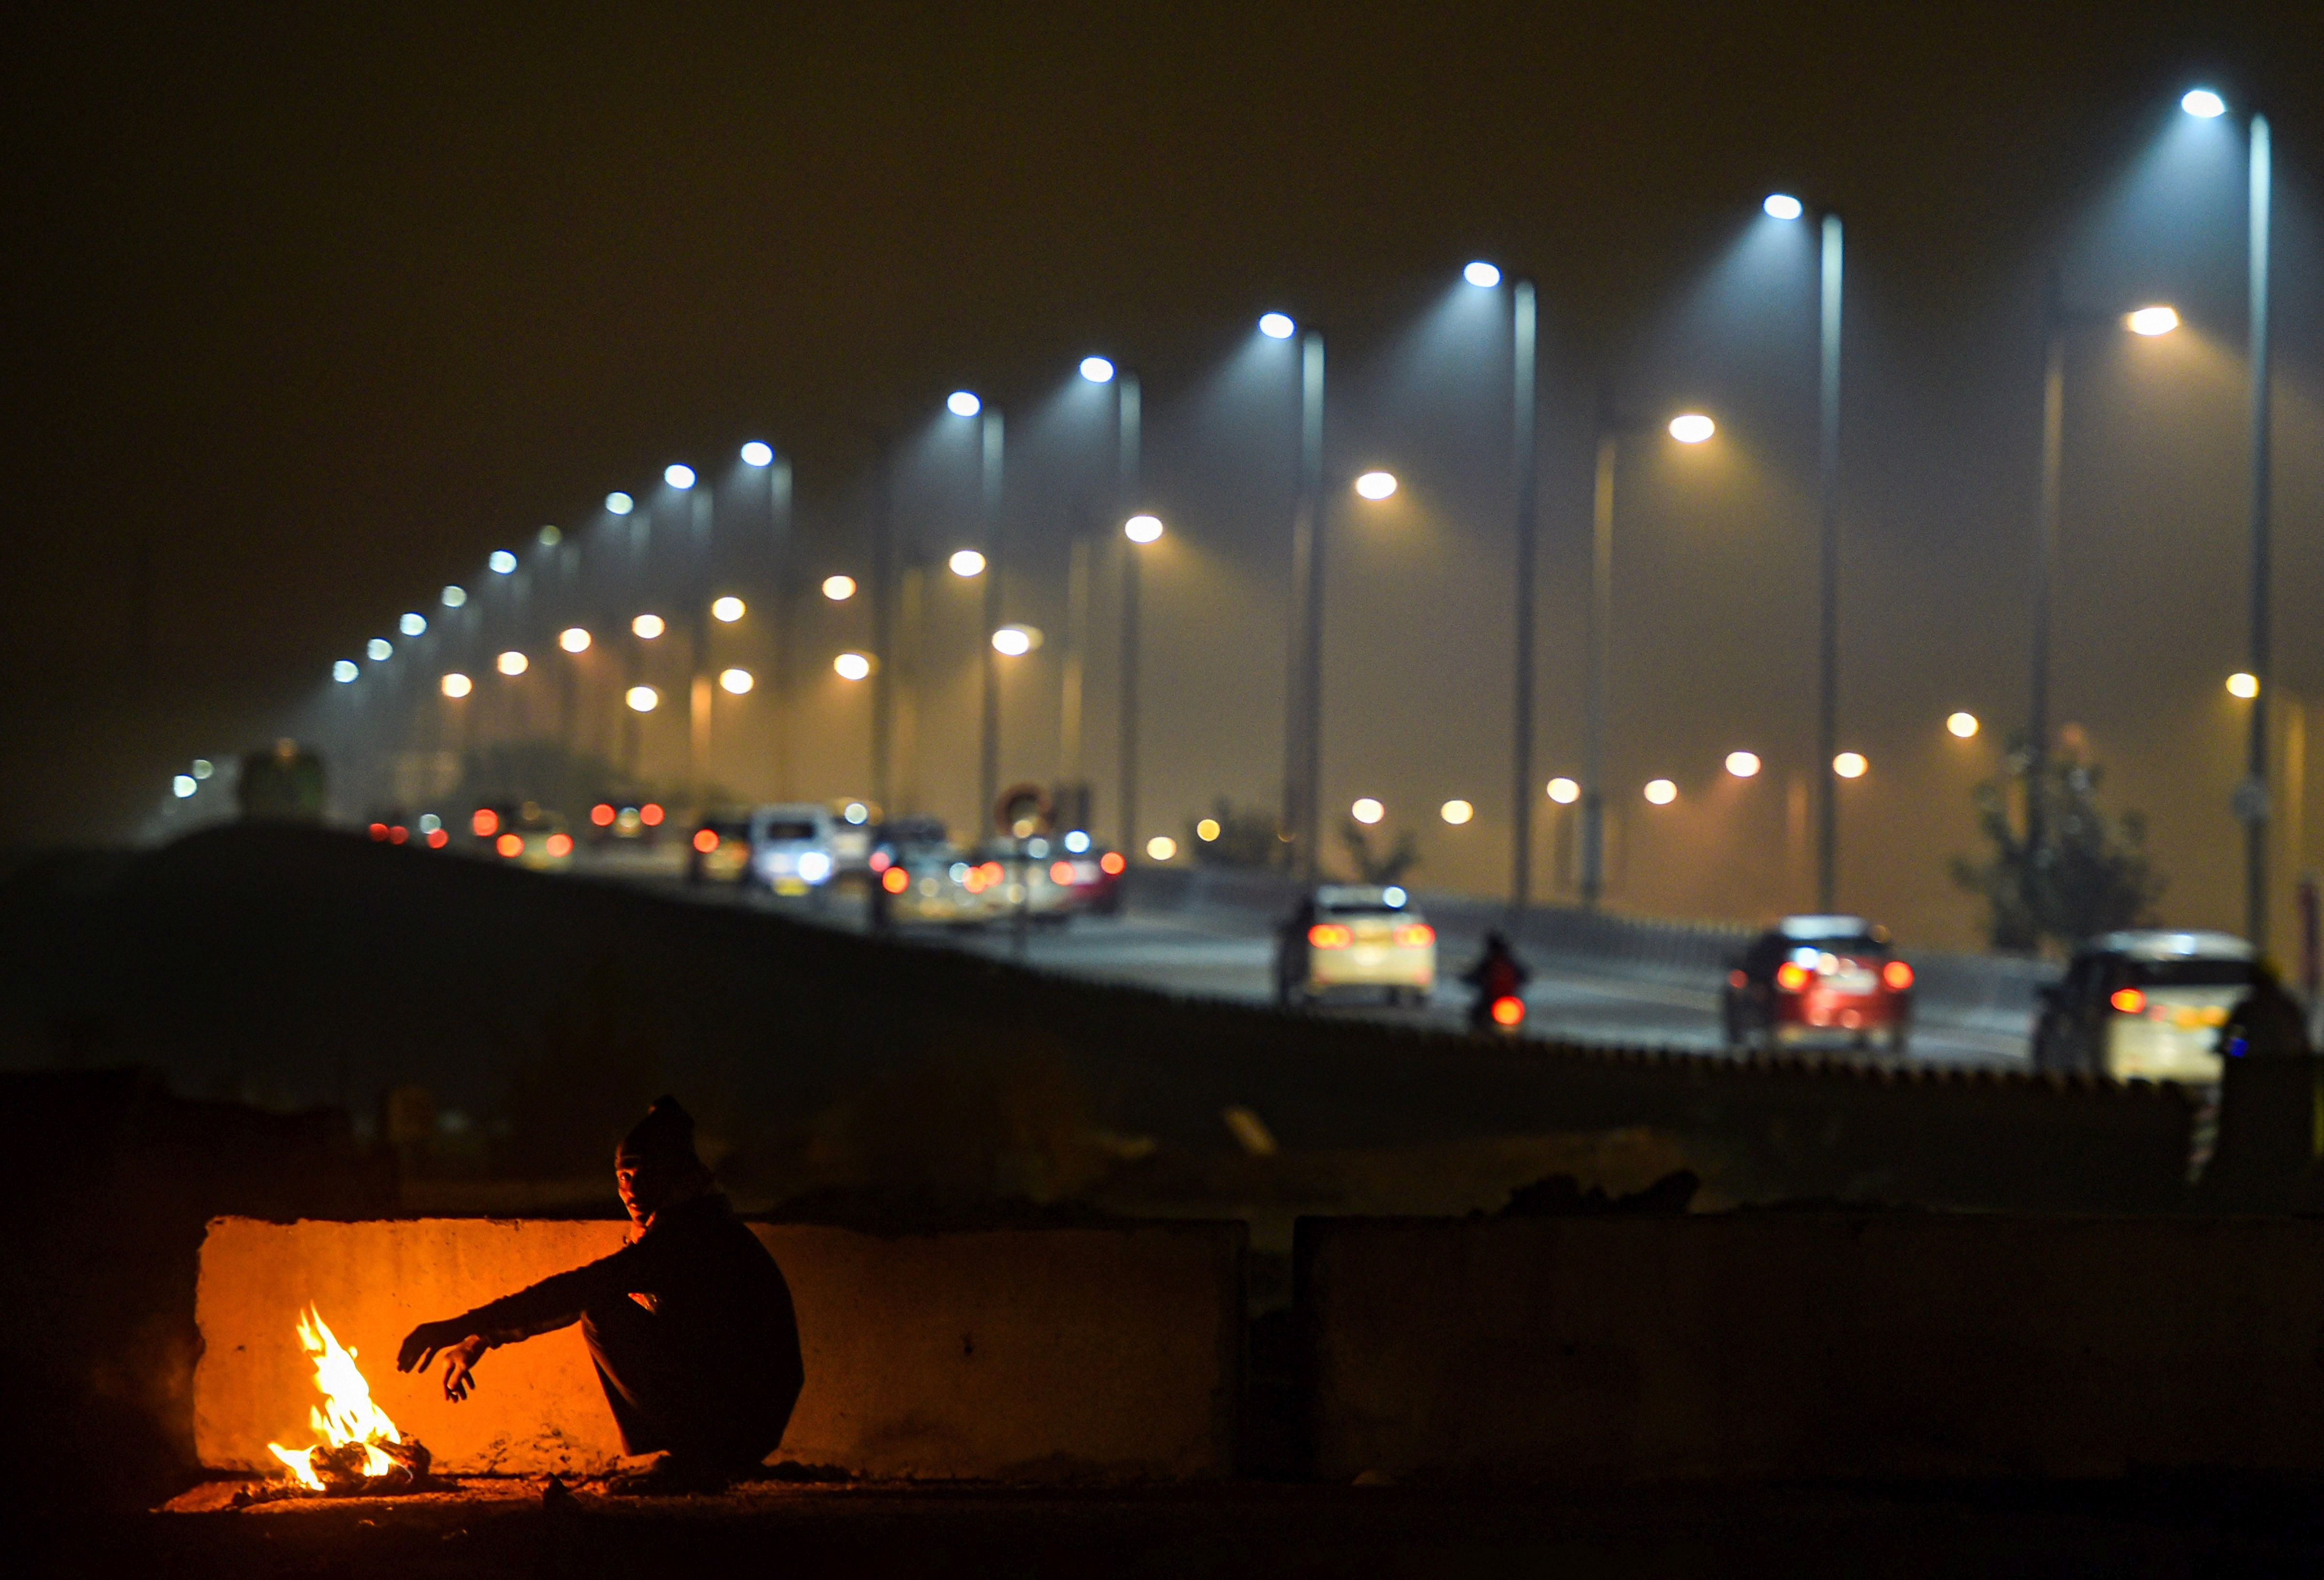 Delhi shivers at 2.4 degrees Celsius in coldest day of the season